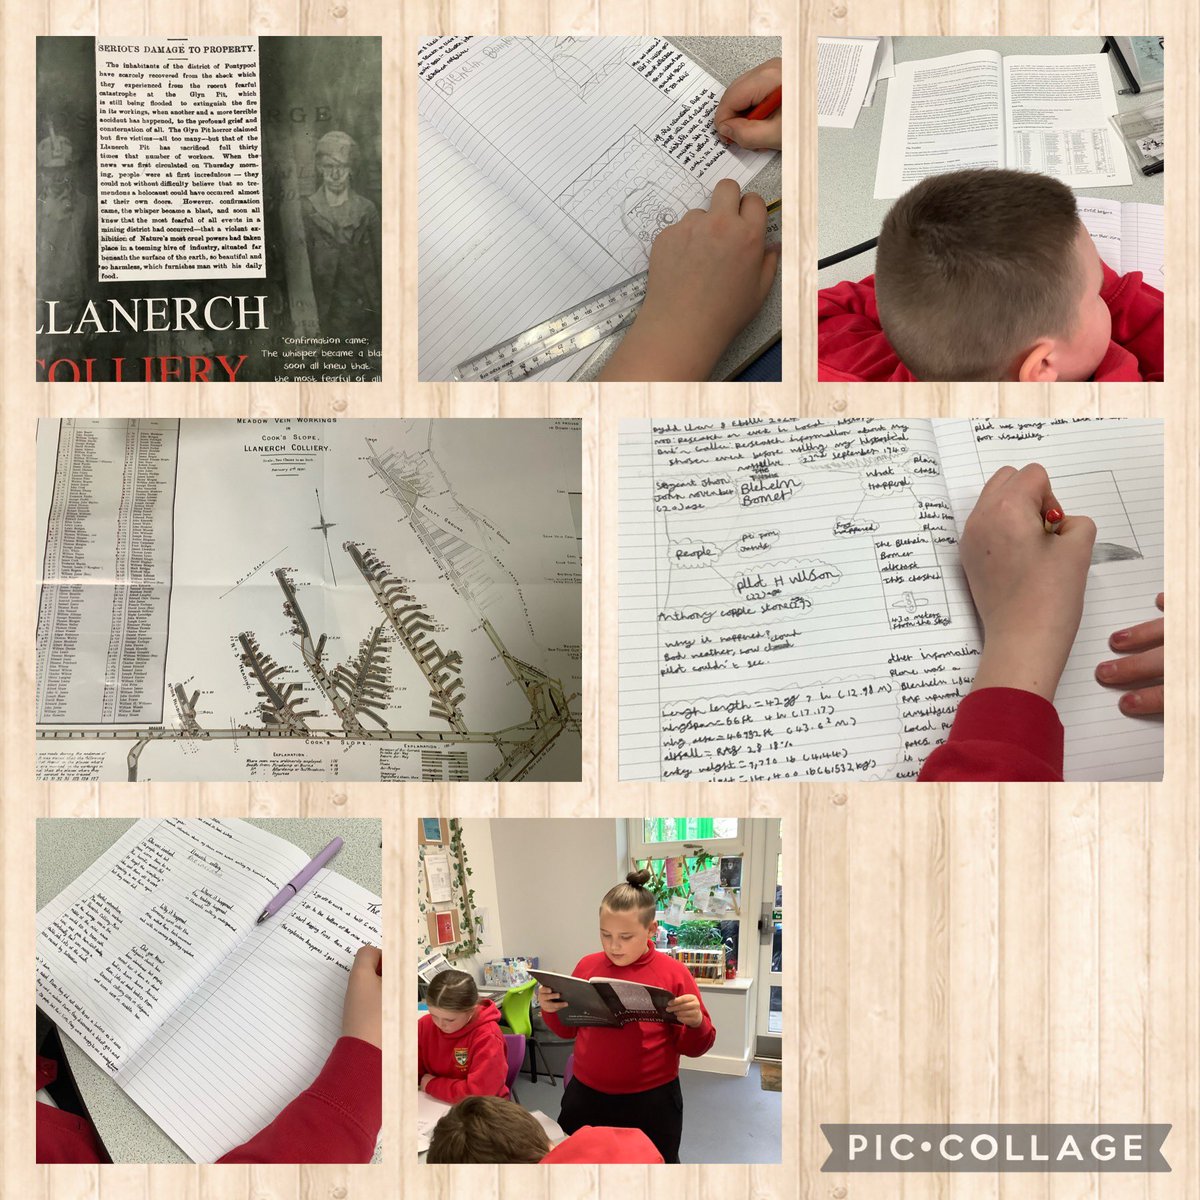 We have had an interesting afternoon researching local history looking at the Blenheim bomber and Llanerch colliery disasters in preparation for our historical narratives✍️ I cannot wait to read your finished pieces 📖#ethicallyinformedcitizens @MrsHLeeY56 @garntegprimary